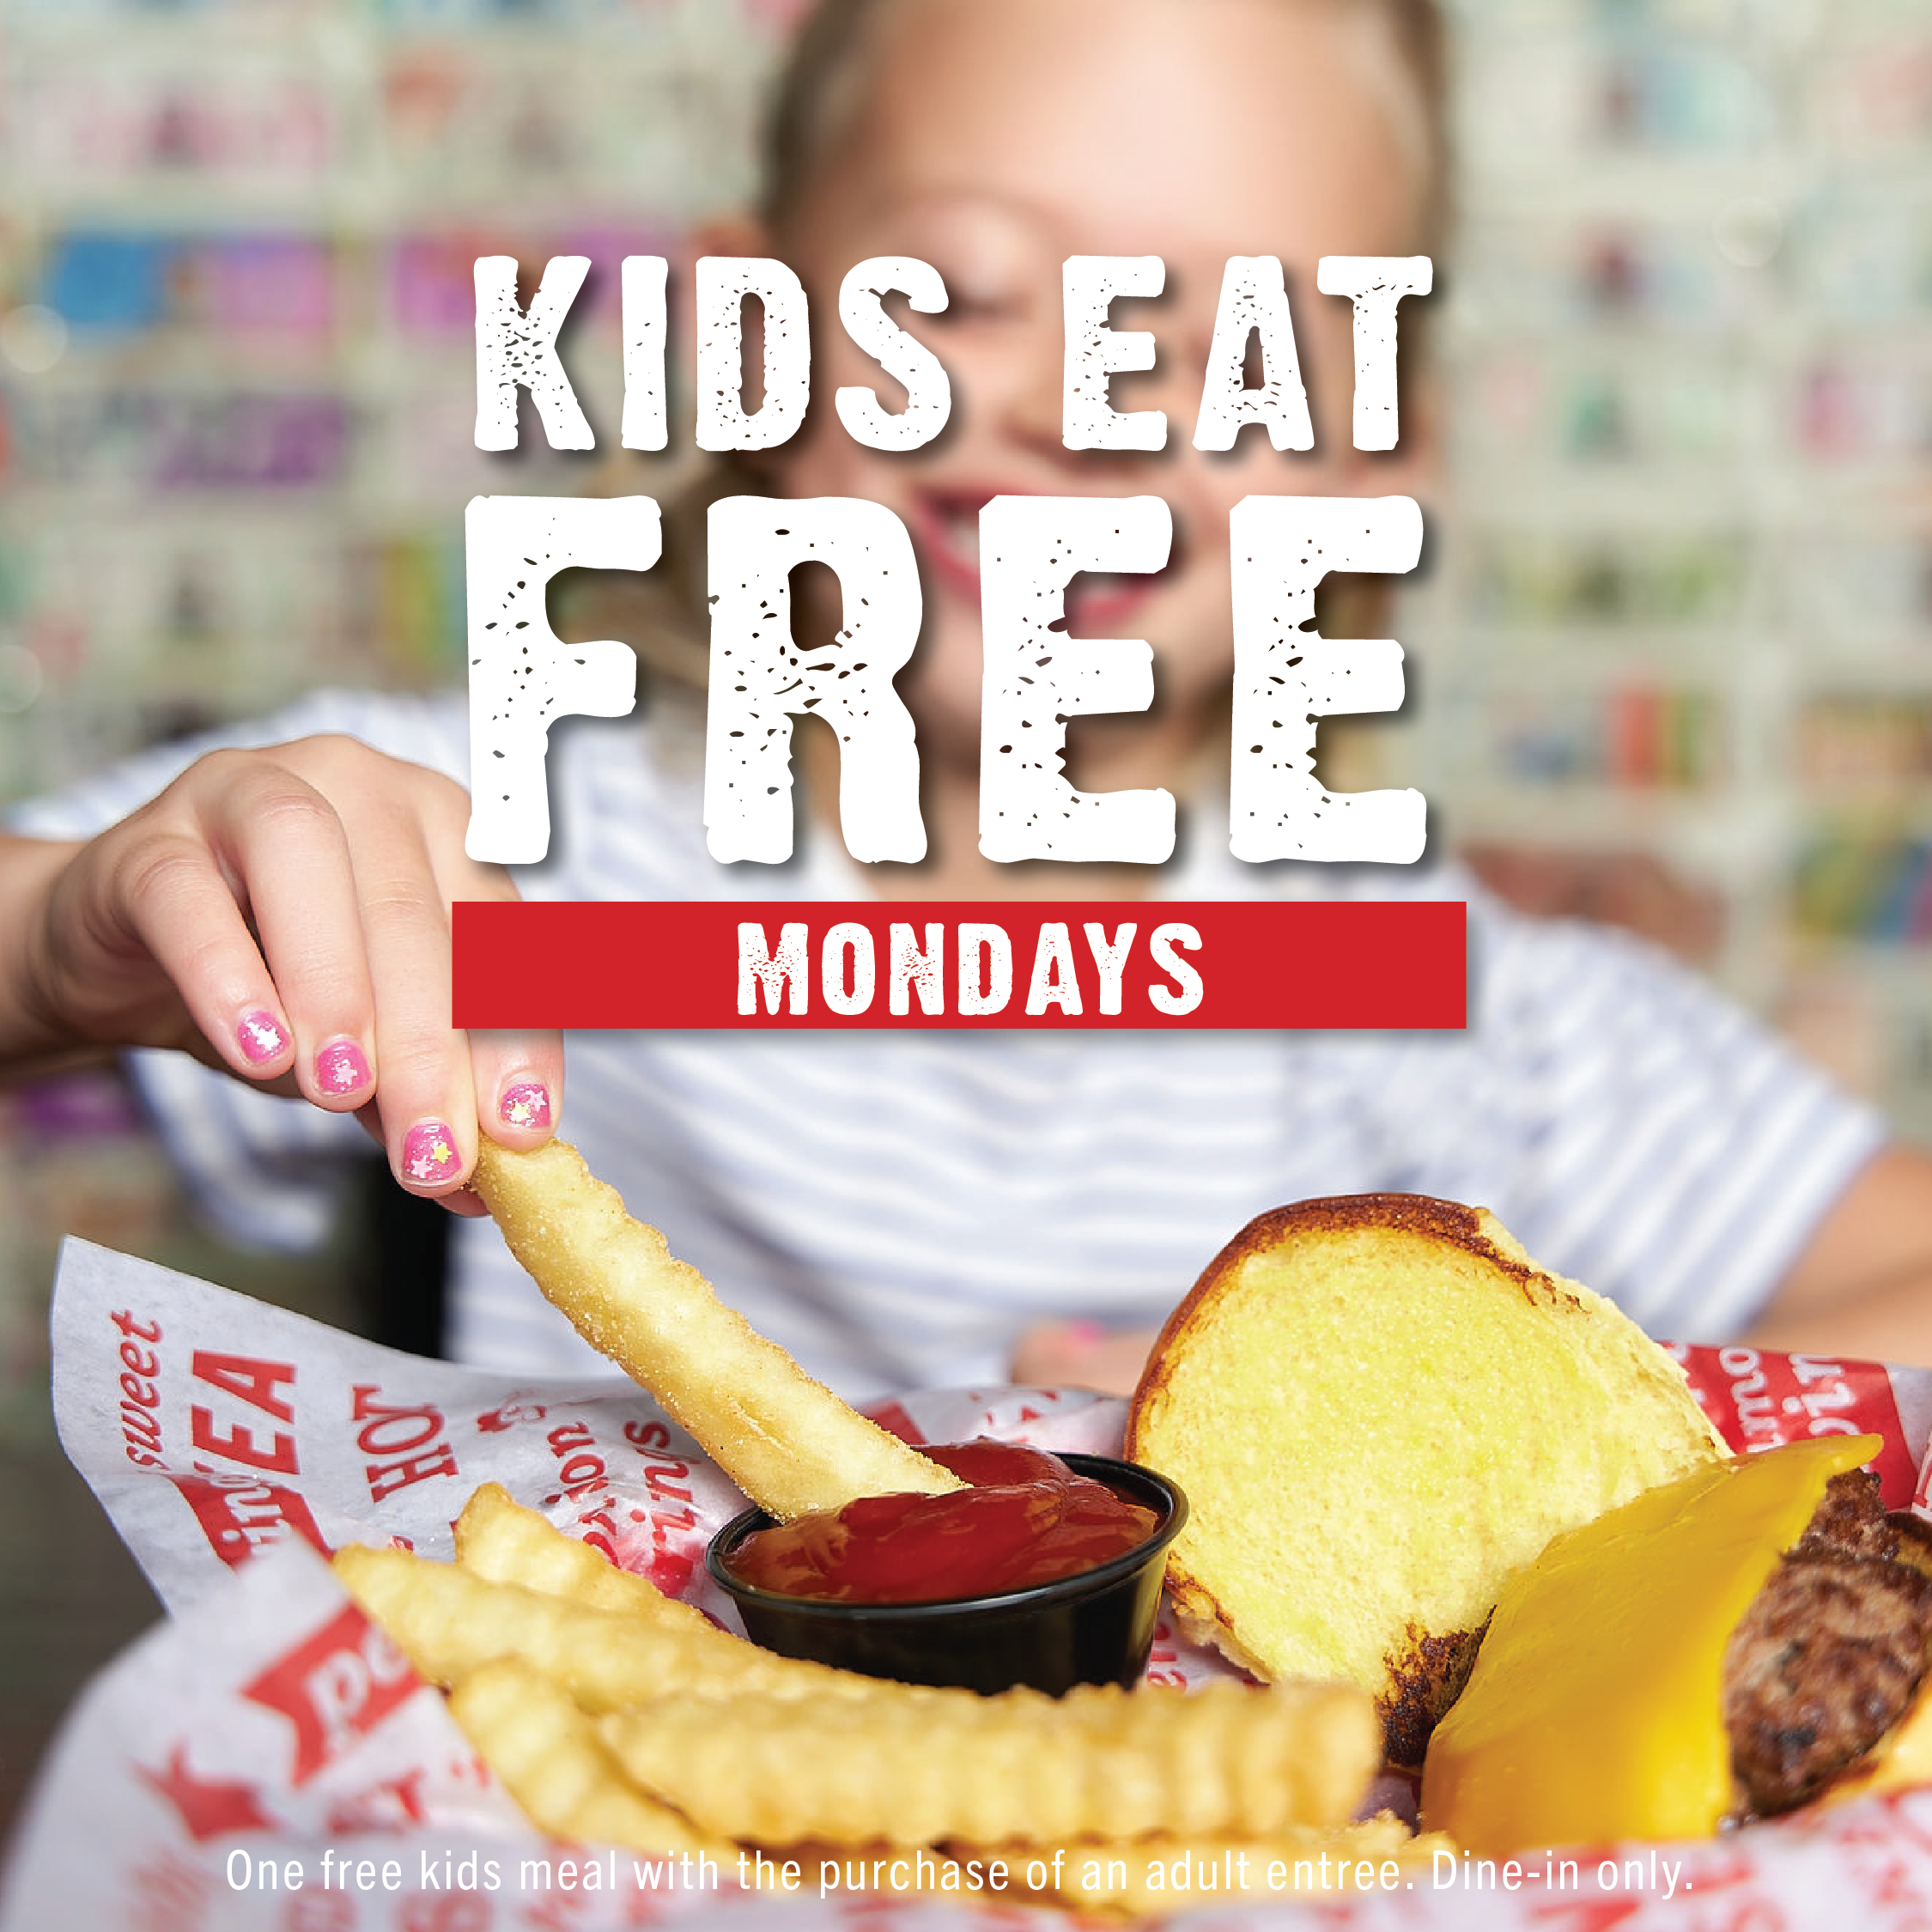 Kids Eat Free in on Monday at Jefferson's in Topeka